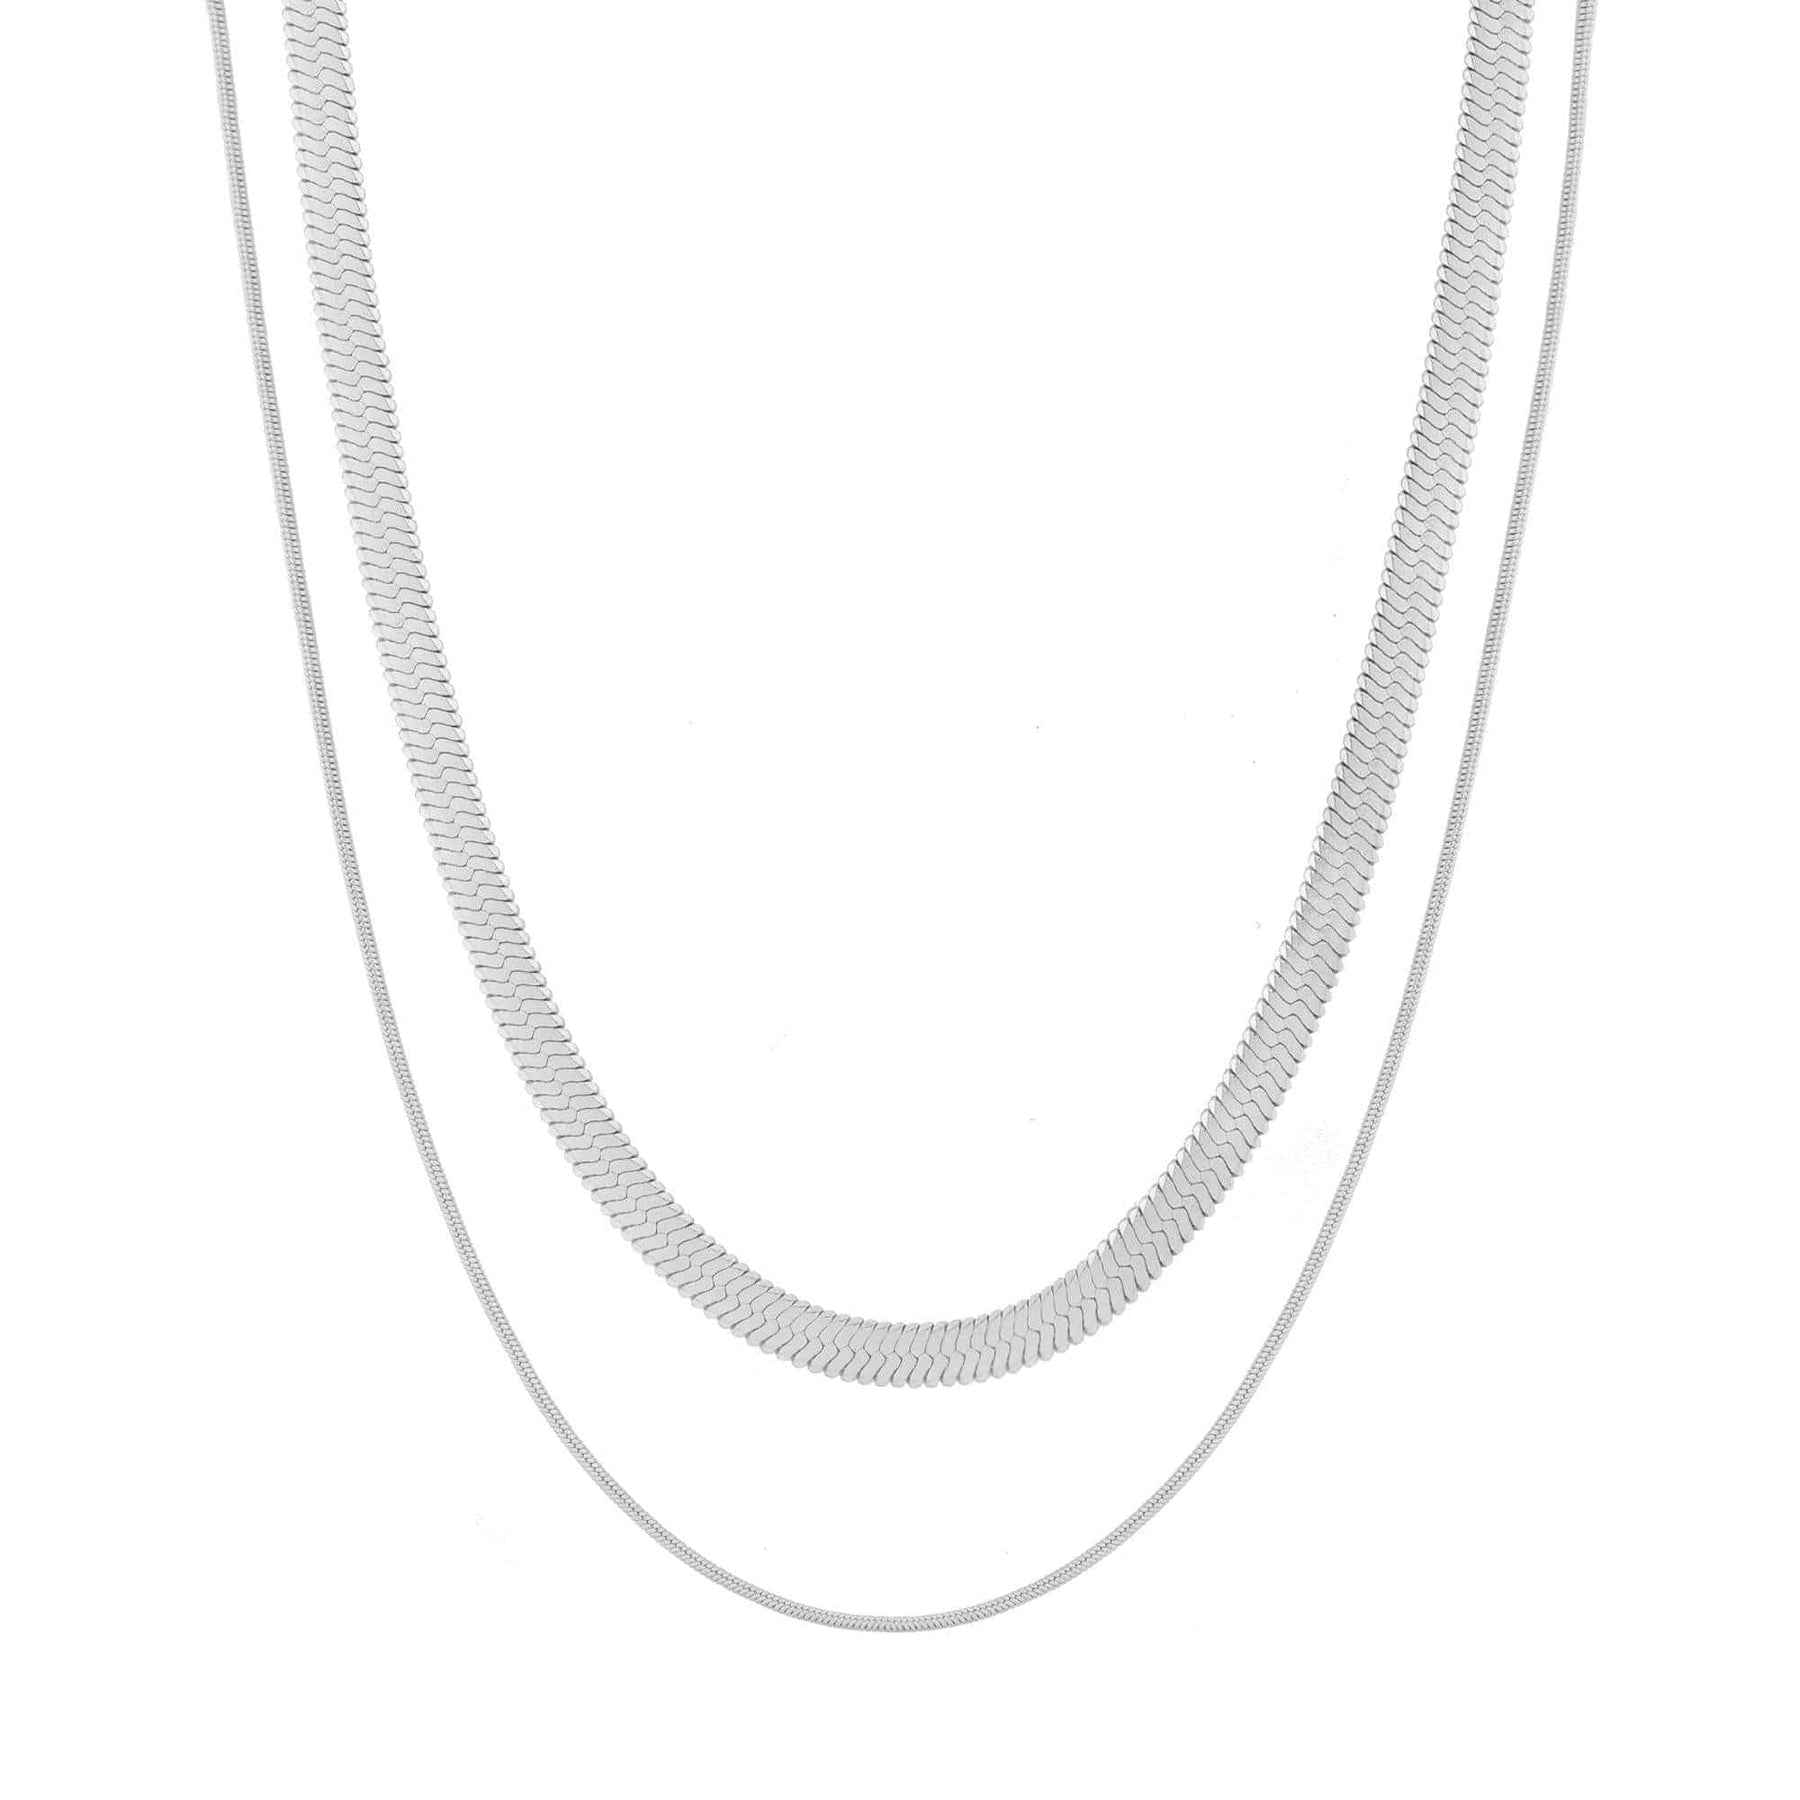 BohoMoon Stainless Steel Colette Layered Necklace Silver